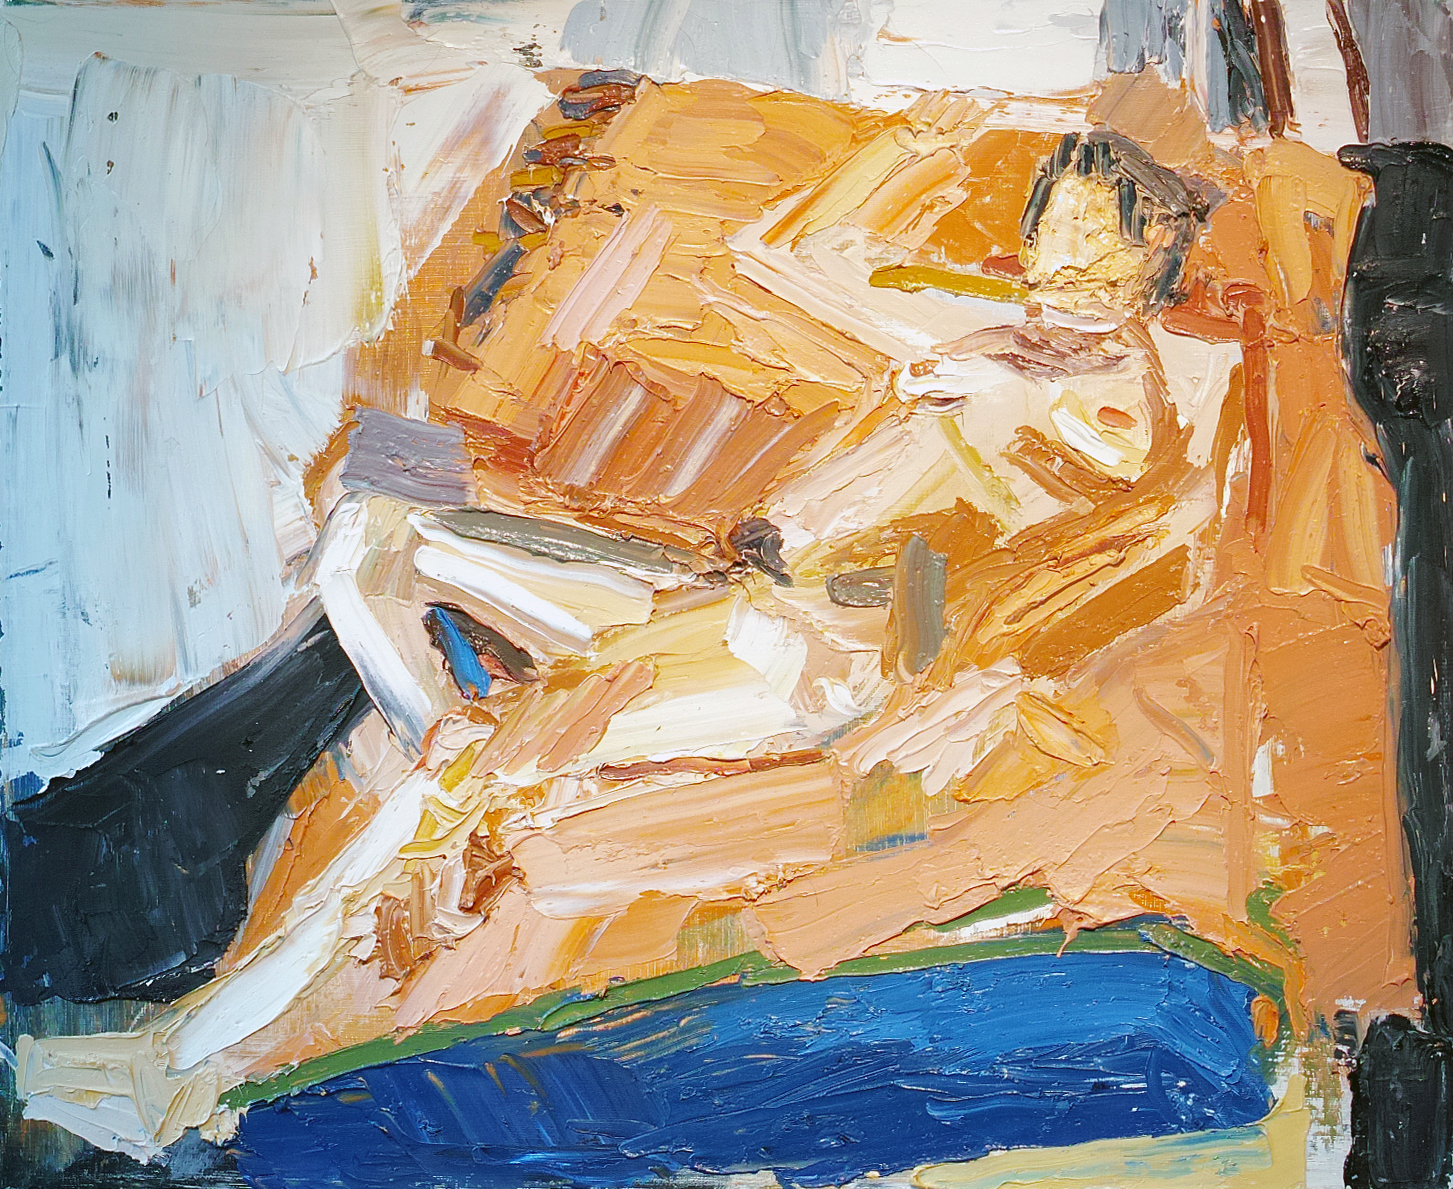 Sleeping Model, 1992, oil on canvas, 18 x 22 inches